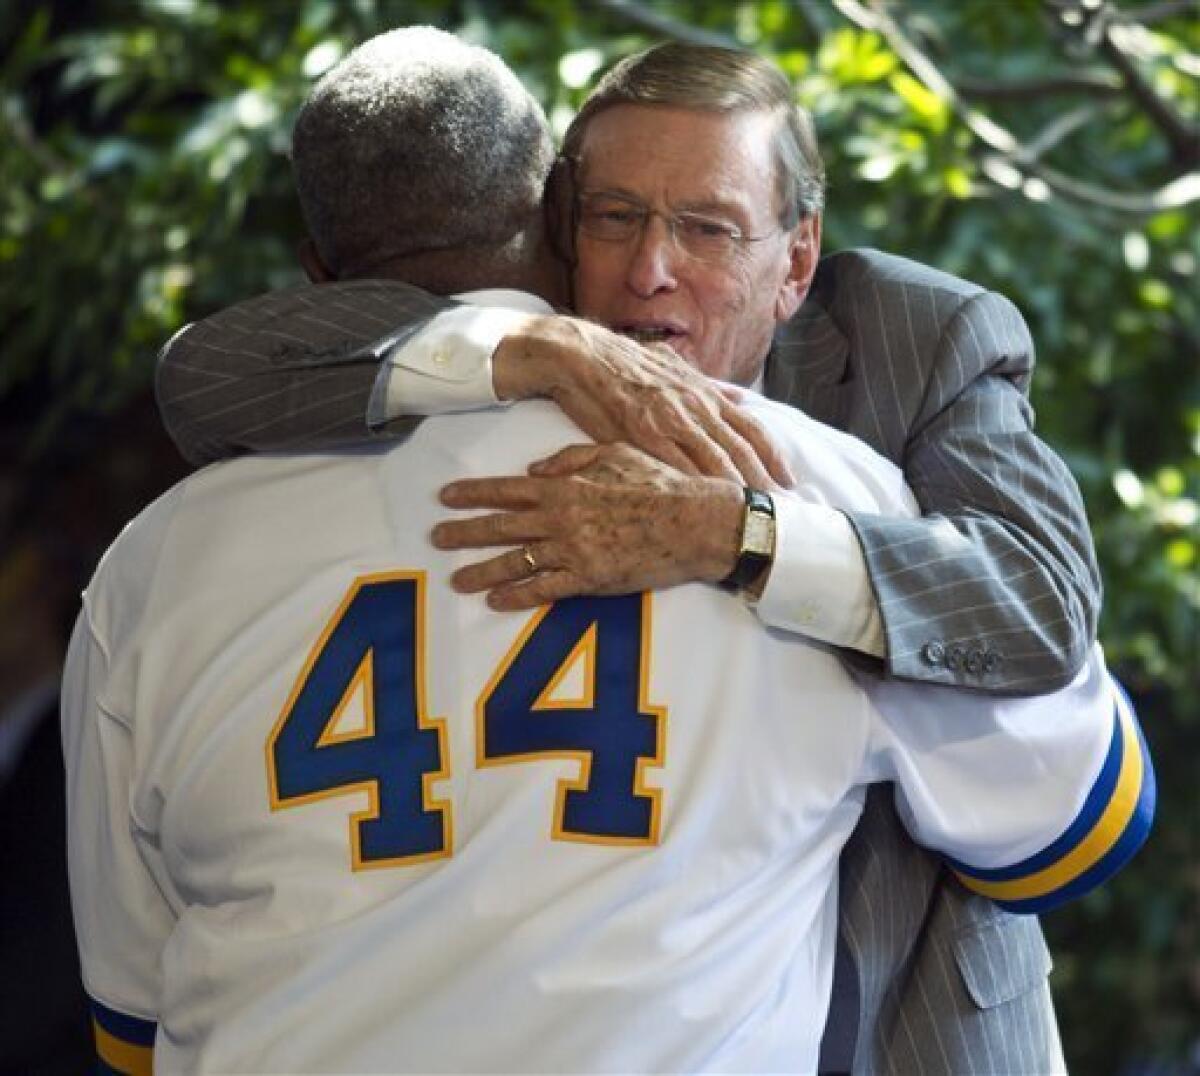 Selig statue unveiled in front of Miller Park - The San Diego Union-Tribune